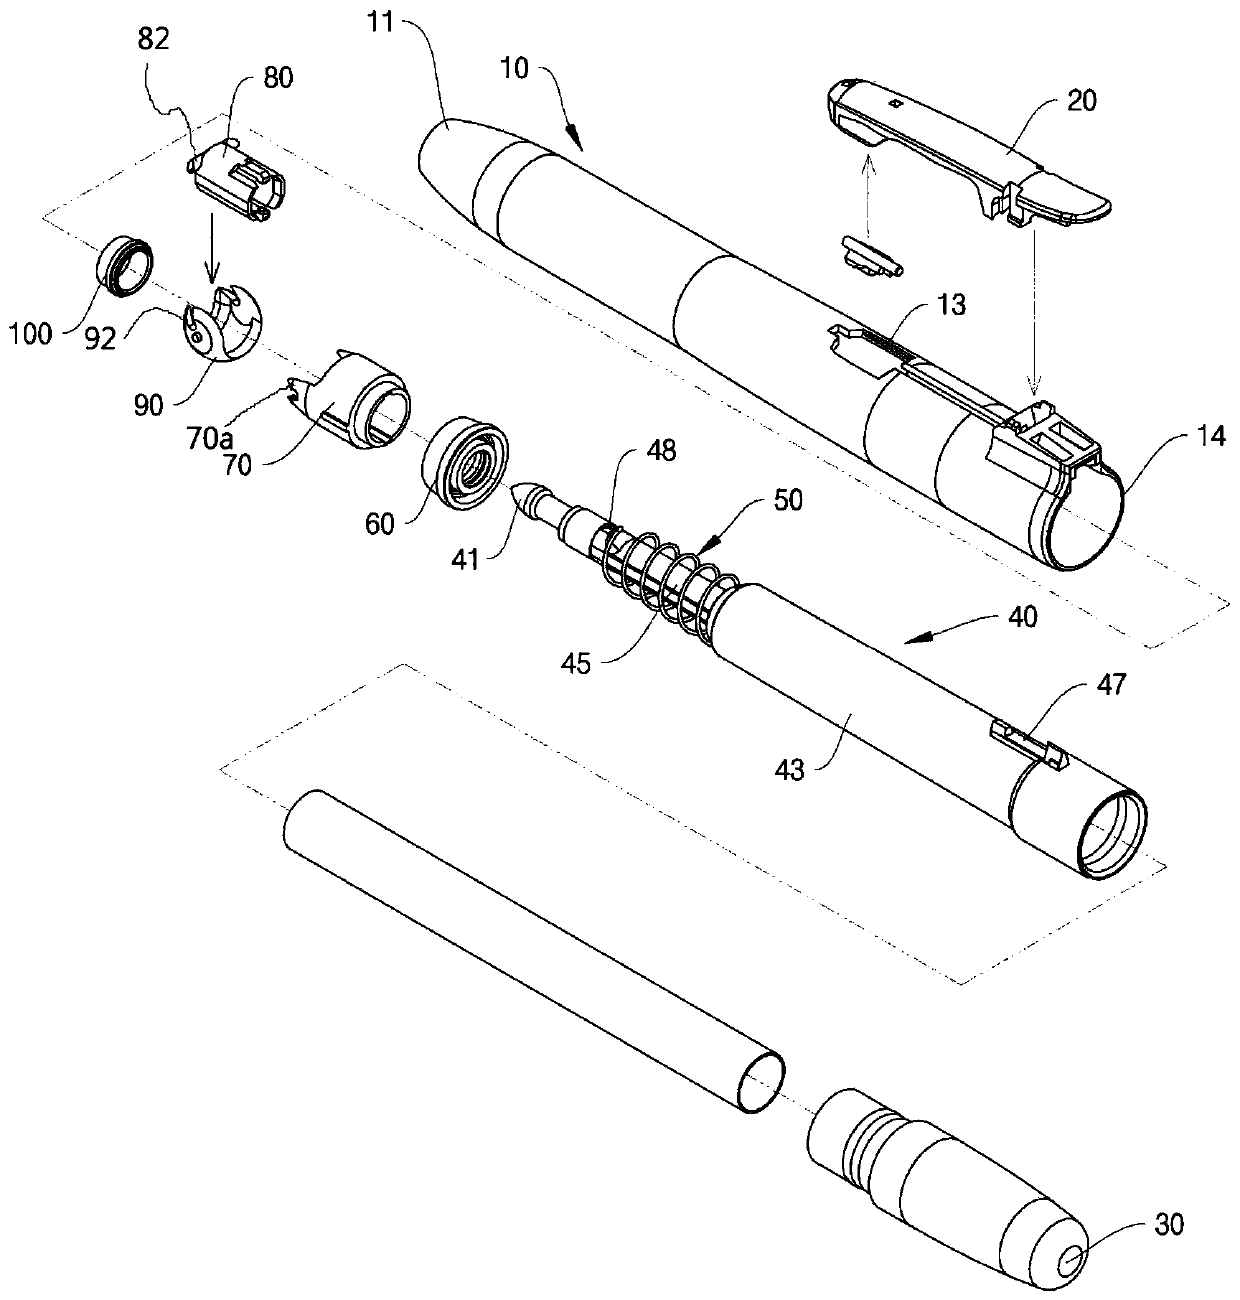 Writing utensil with self-sealing structure